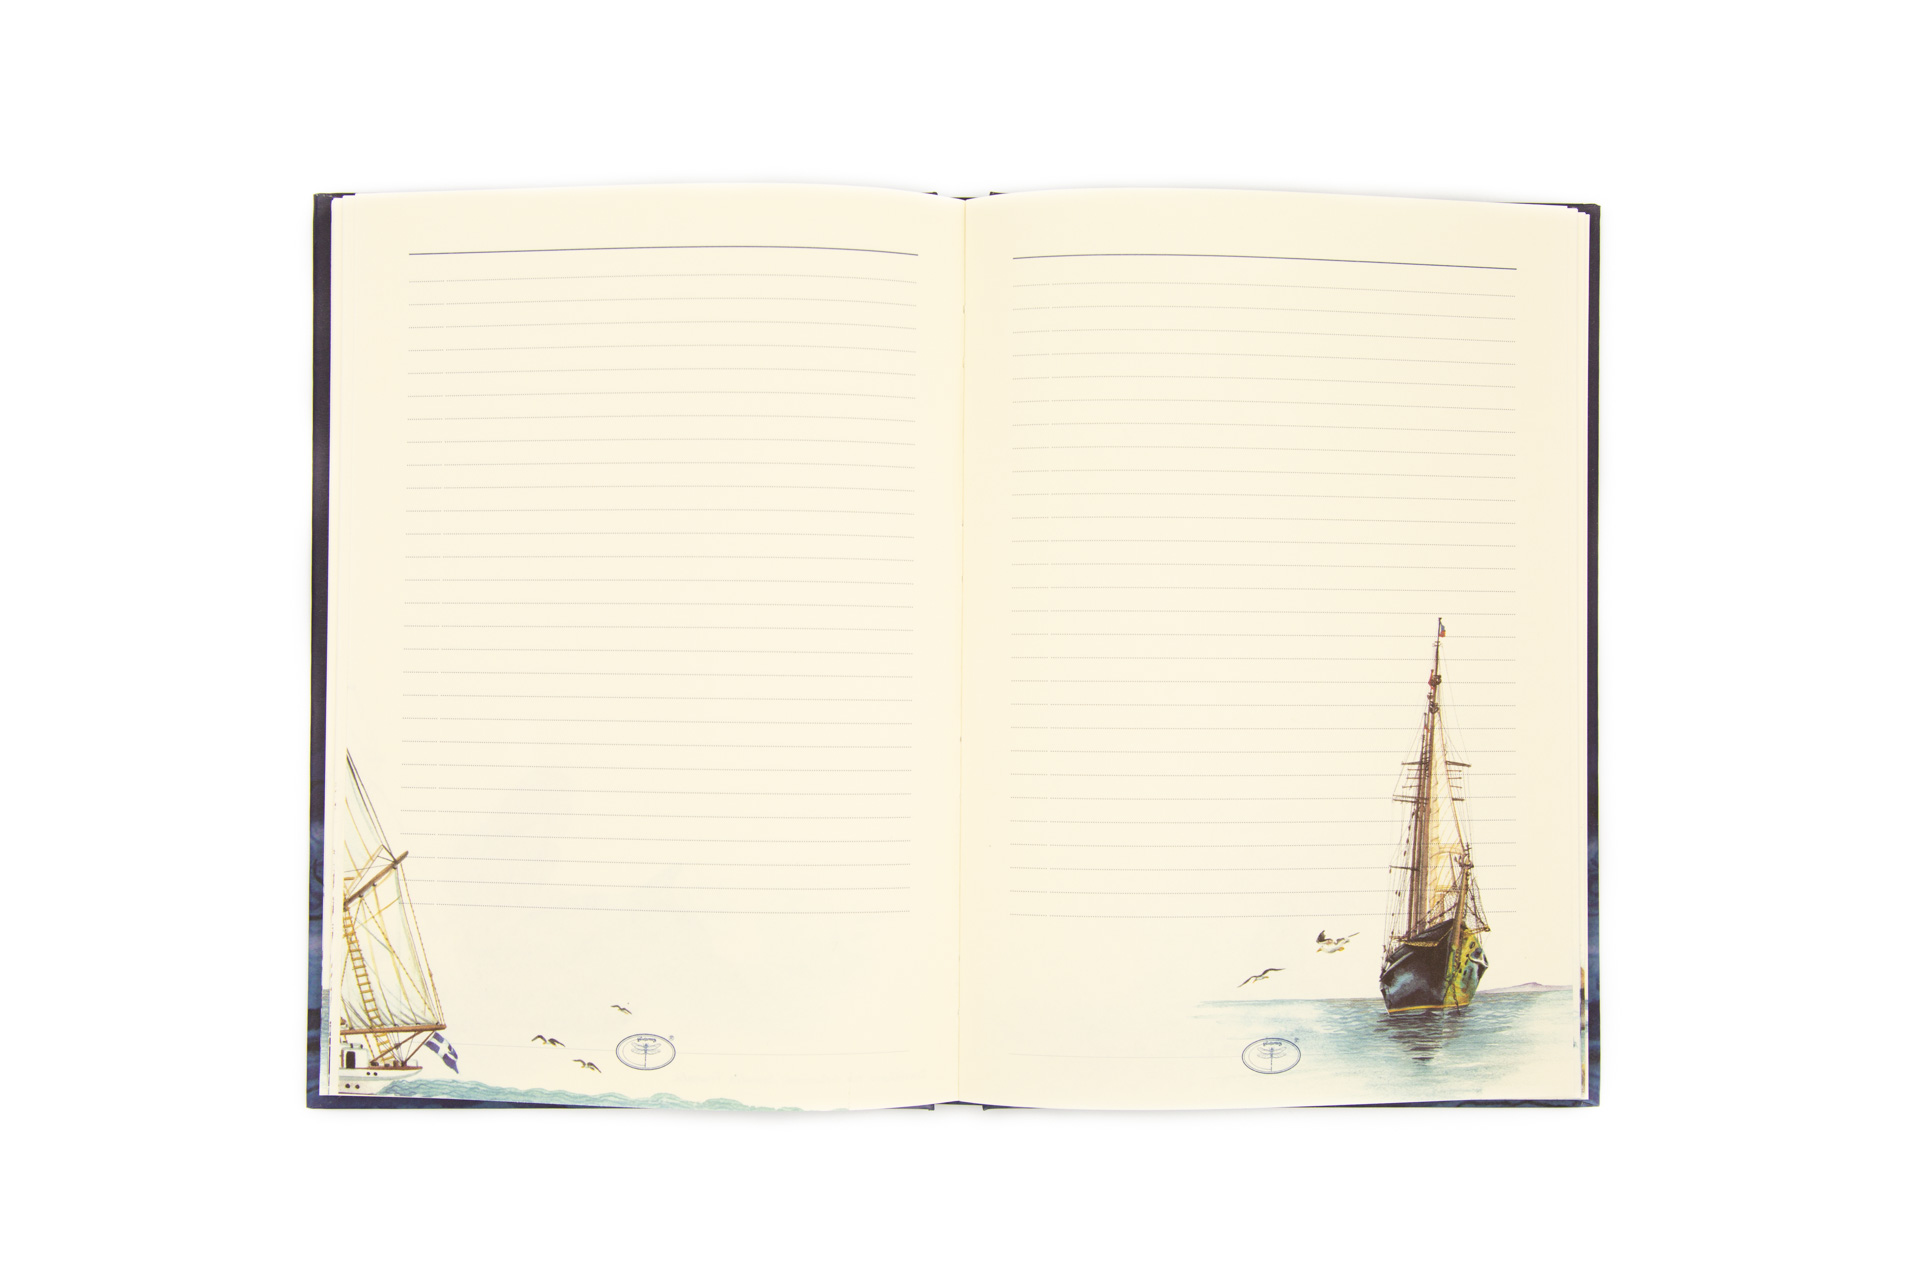 Personal notebook "Sailboats" - Spread